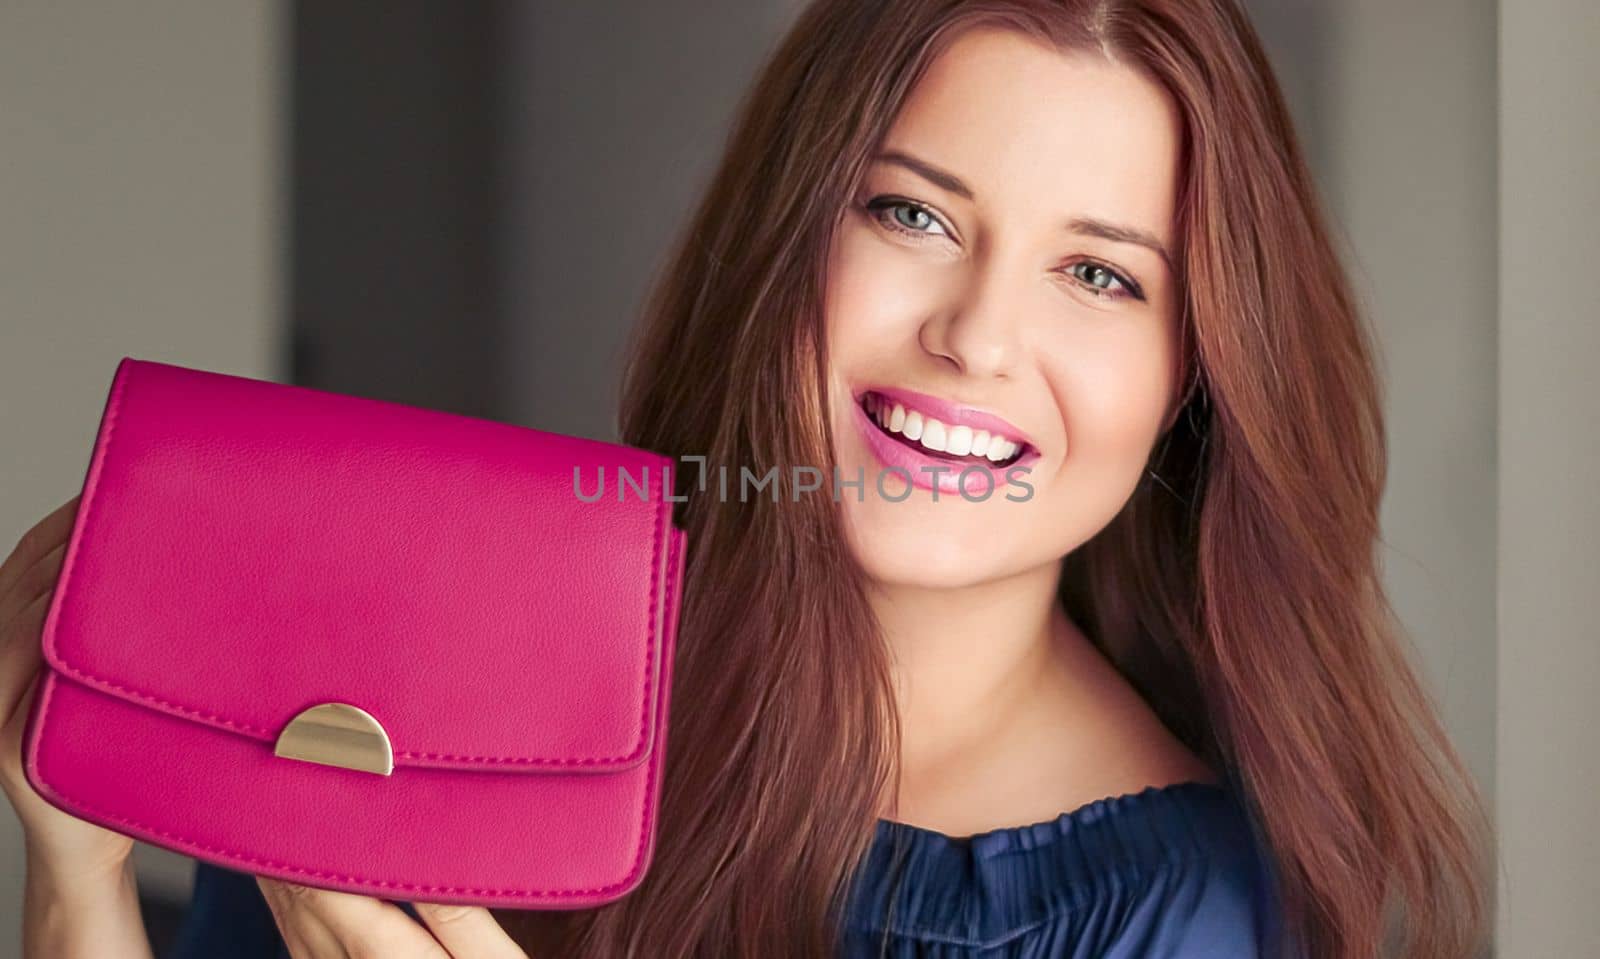 Fashion and accessories, happy beautiful woman holding small pink handbag with golden details as stylish accessory and luxury shopping by Anneleven